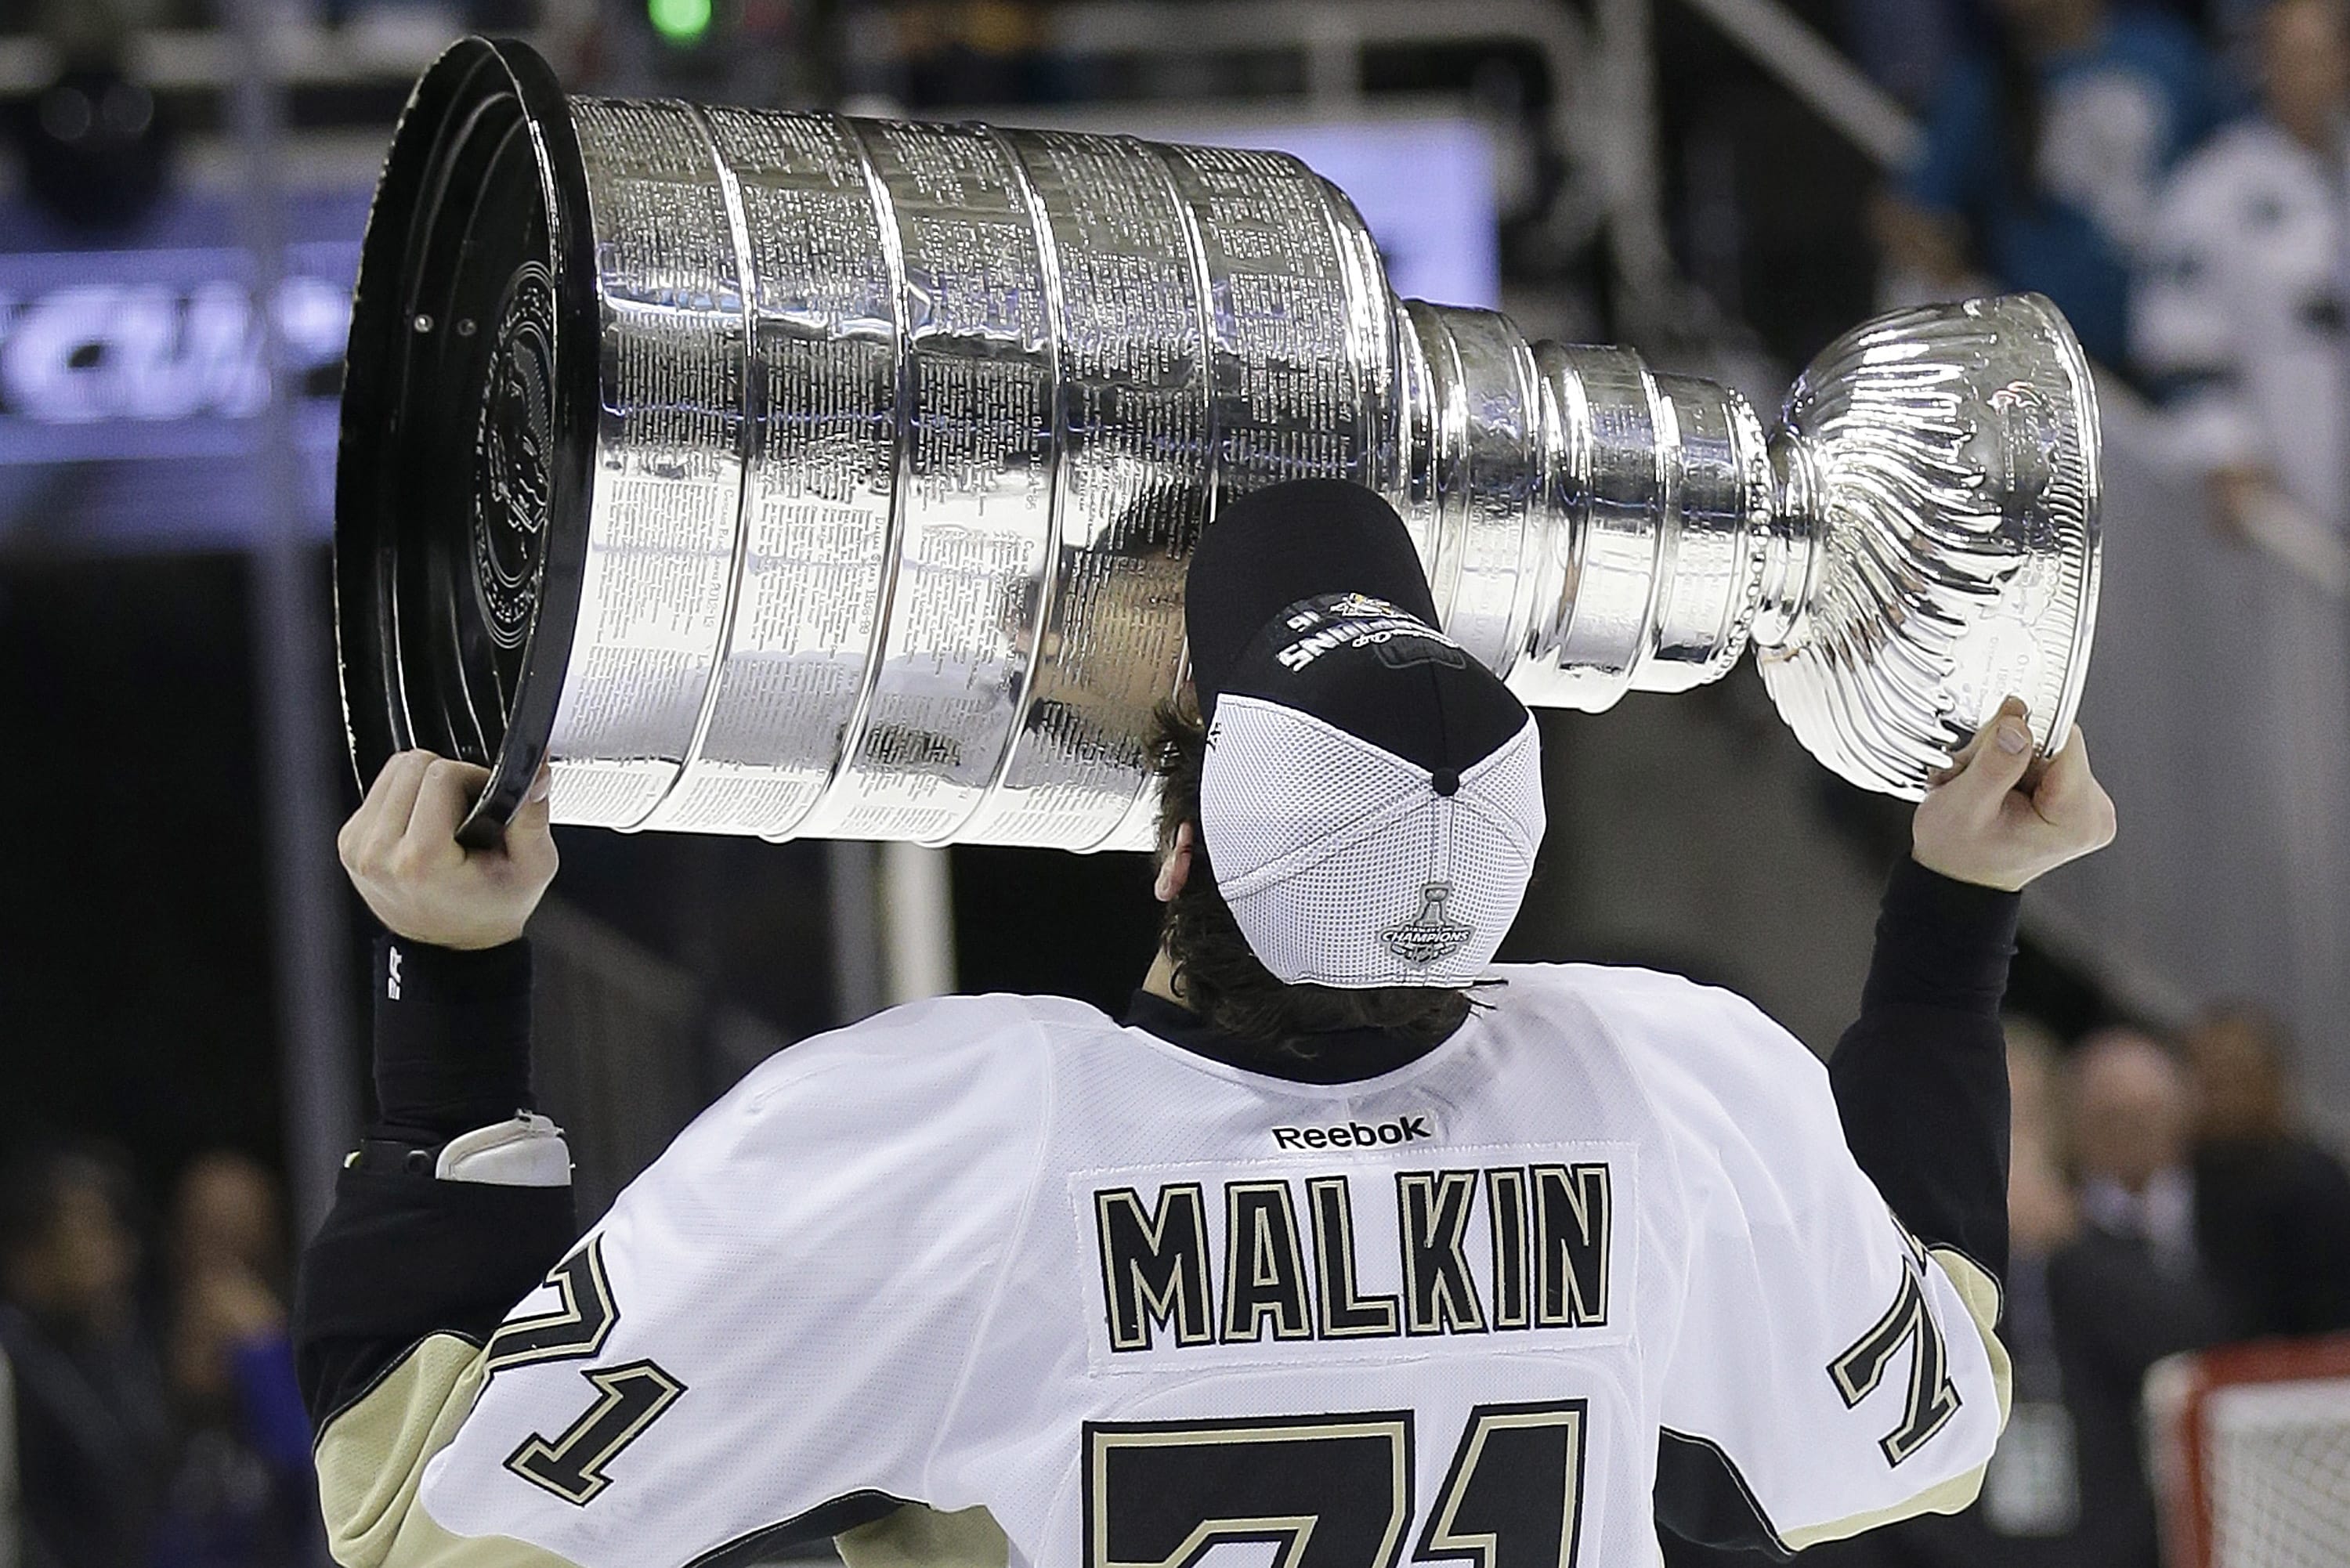 Pittsburgh Penguins center Evgeni Malkin (71), from Russia, kisses the Stanley Cup after Game 6 of the NHL hockey Stanley Cup Finals between the San Jose Sharks and the Penguins in San Jose, Calif., Sunday, June 12, 2016. The Penguins won 3-1 to win the series 4-2.